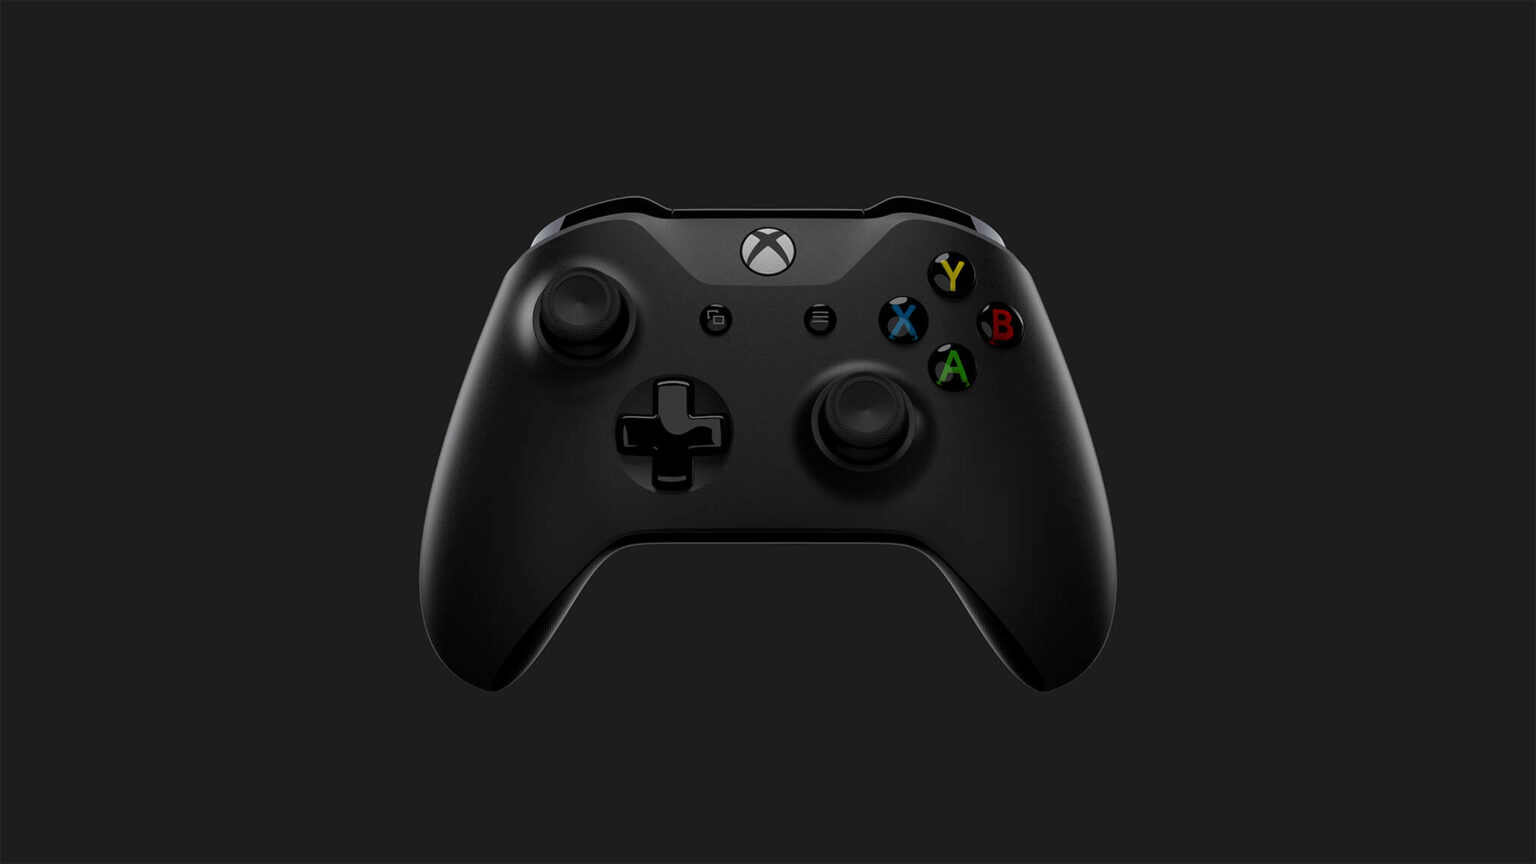 Microsoft continues to improve support for its products on Chromium. The company recently released the Windows.Gaming.Input API for browsers, which improves browser compatibility with Xbox controllers.